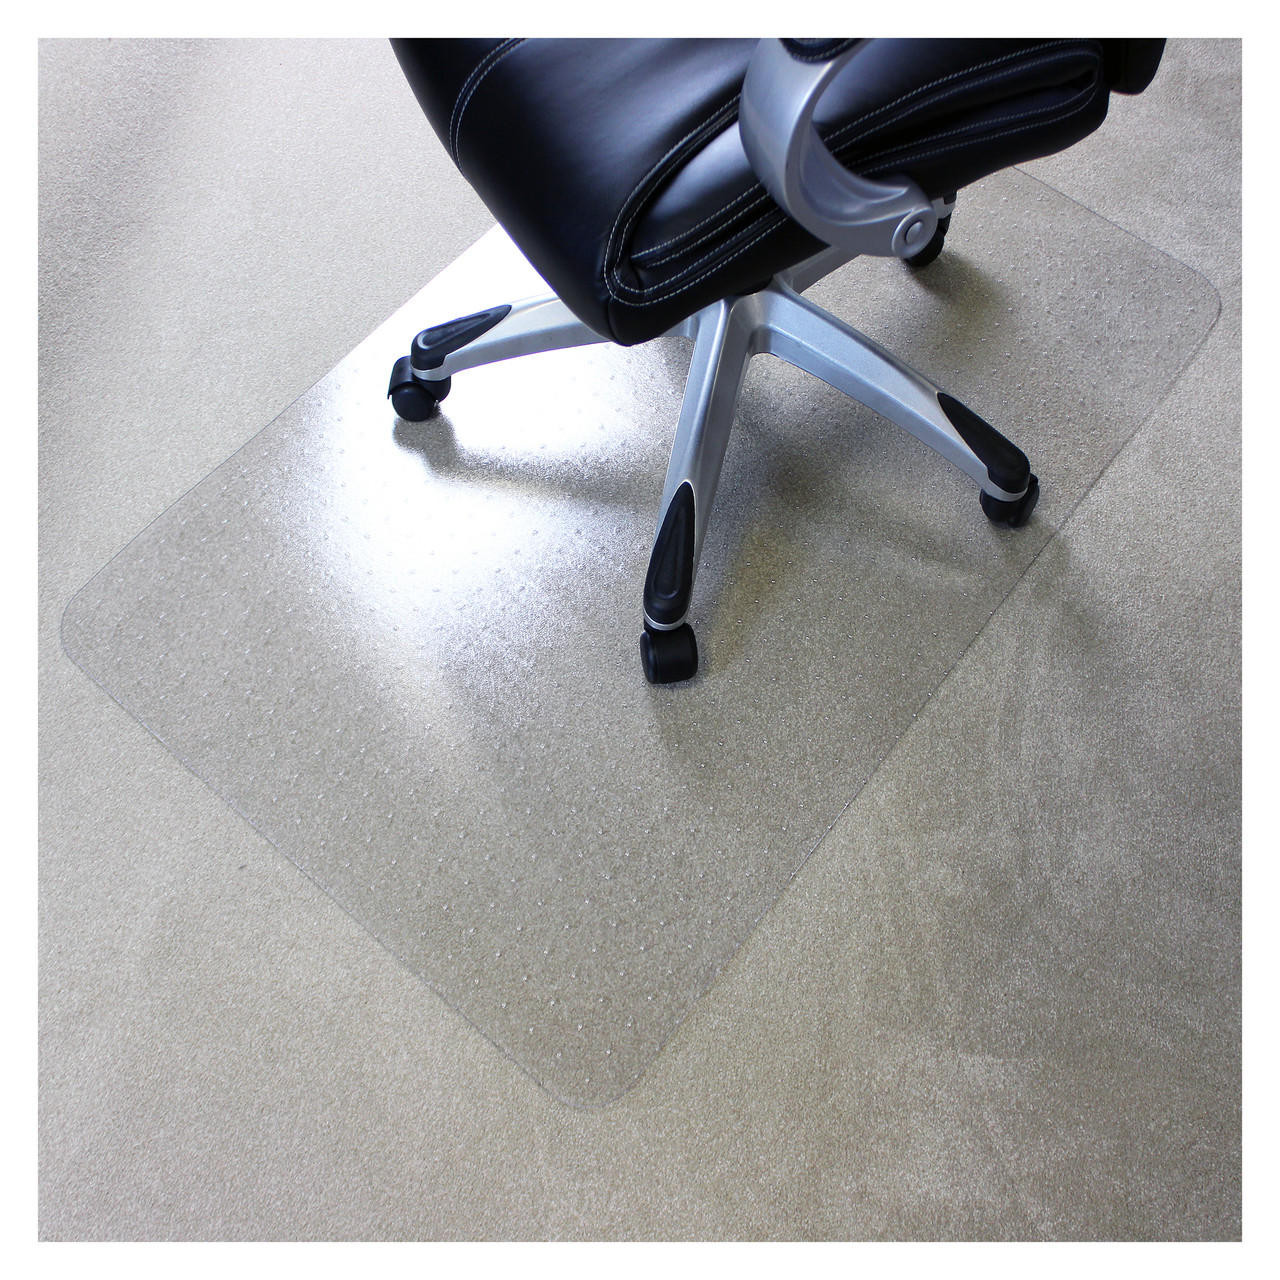 46 x 60 Office Chair Mat for Low Medium Pile Carpet, Office Carpet Chair  Mat,Transparent Non-slip Carpet Protecor Mats with Grippers for Work, Home,  Gaming 